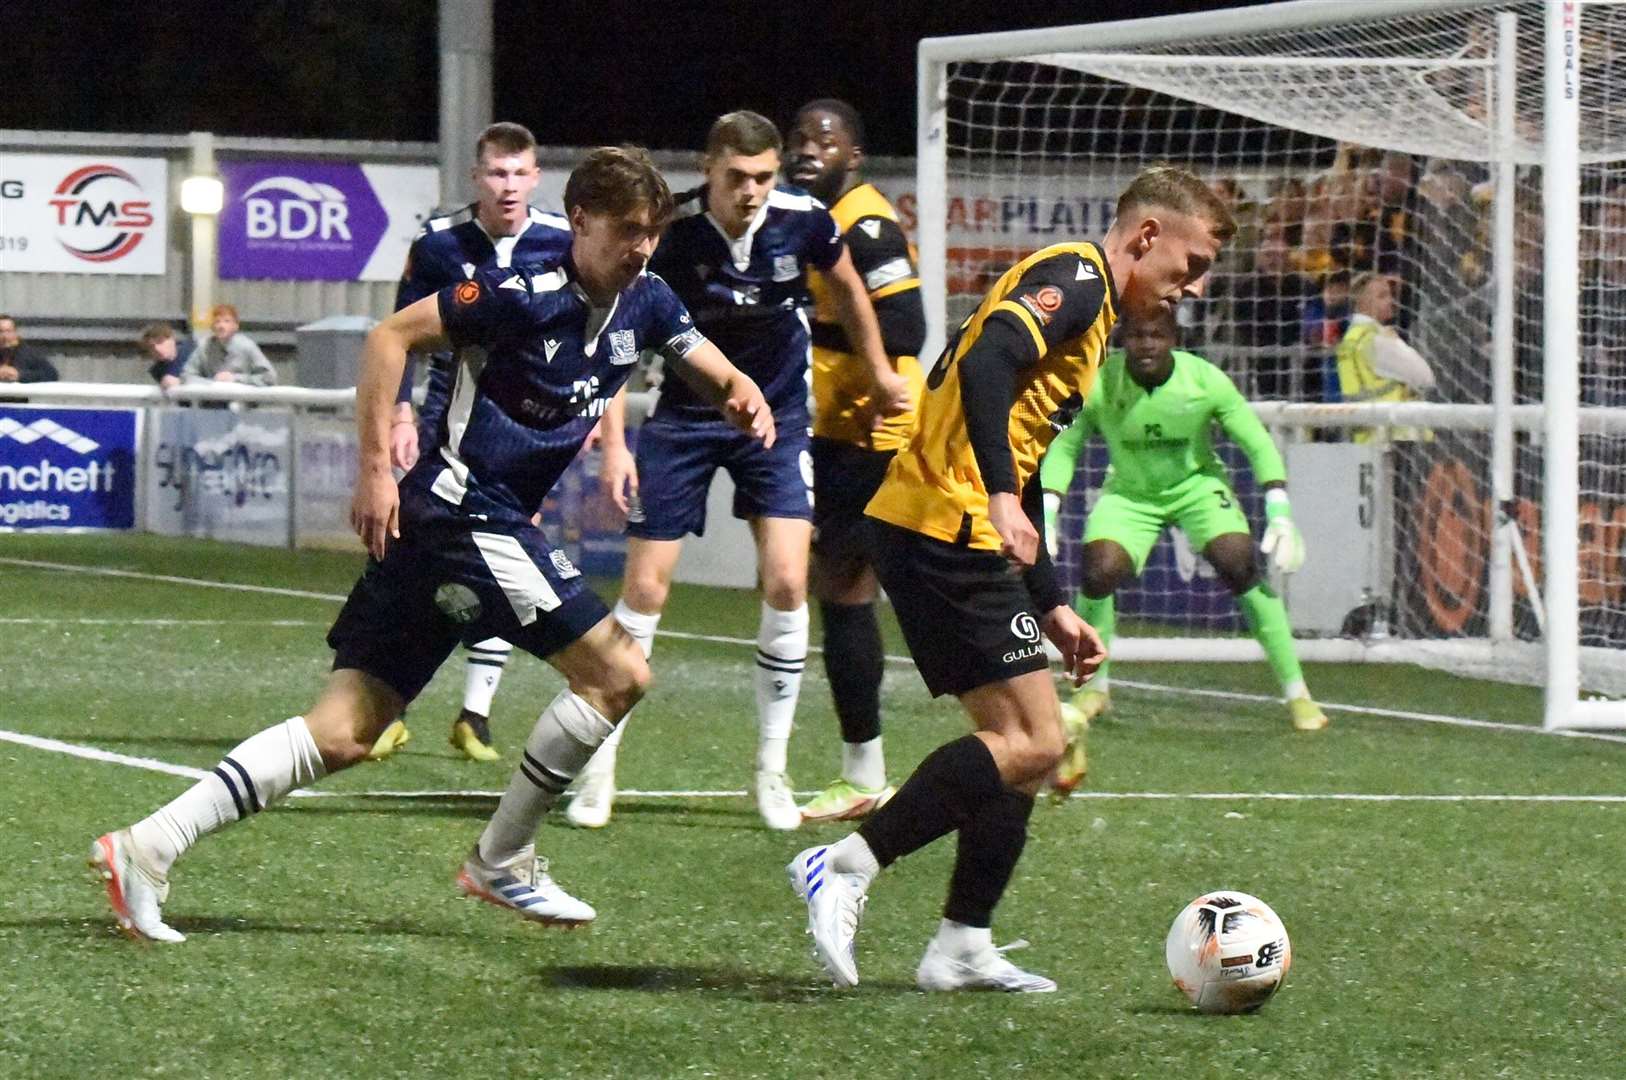 Sam Corne tries to create an opening during Maidstone's defeat by Southend. Picture: Steve Terrell